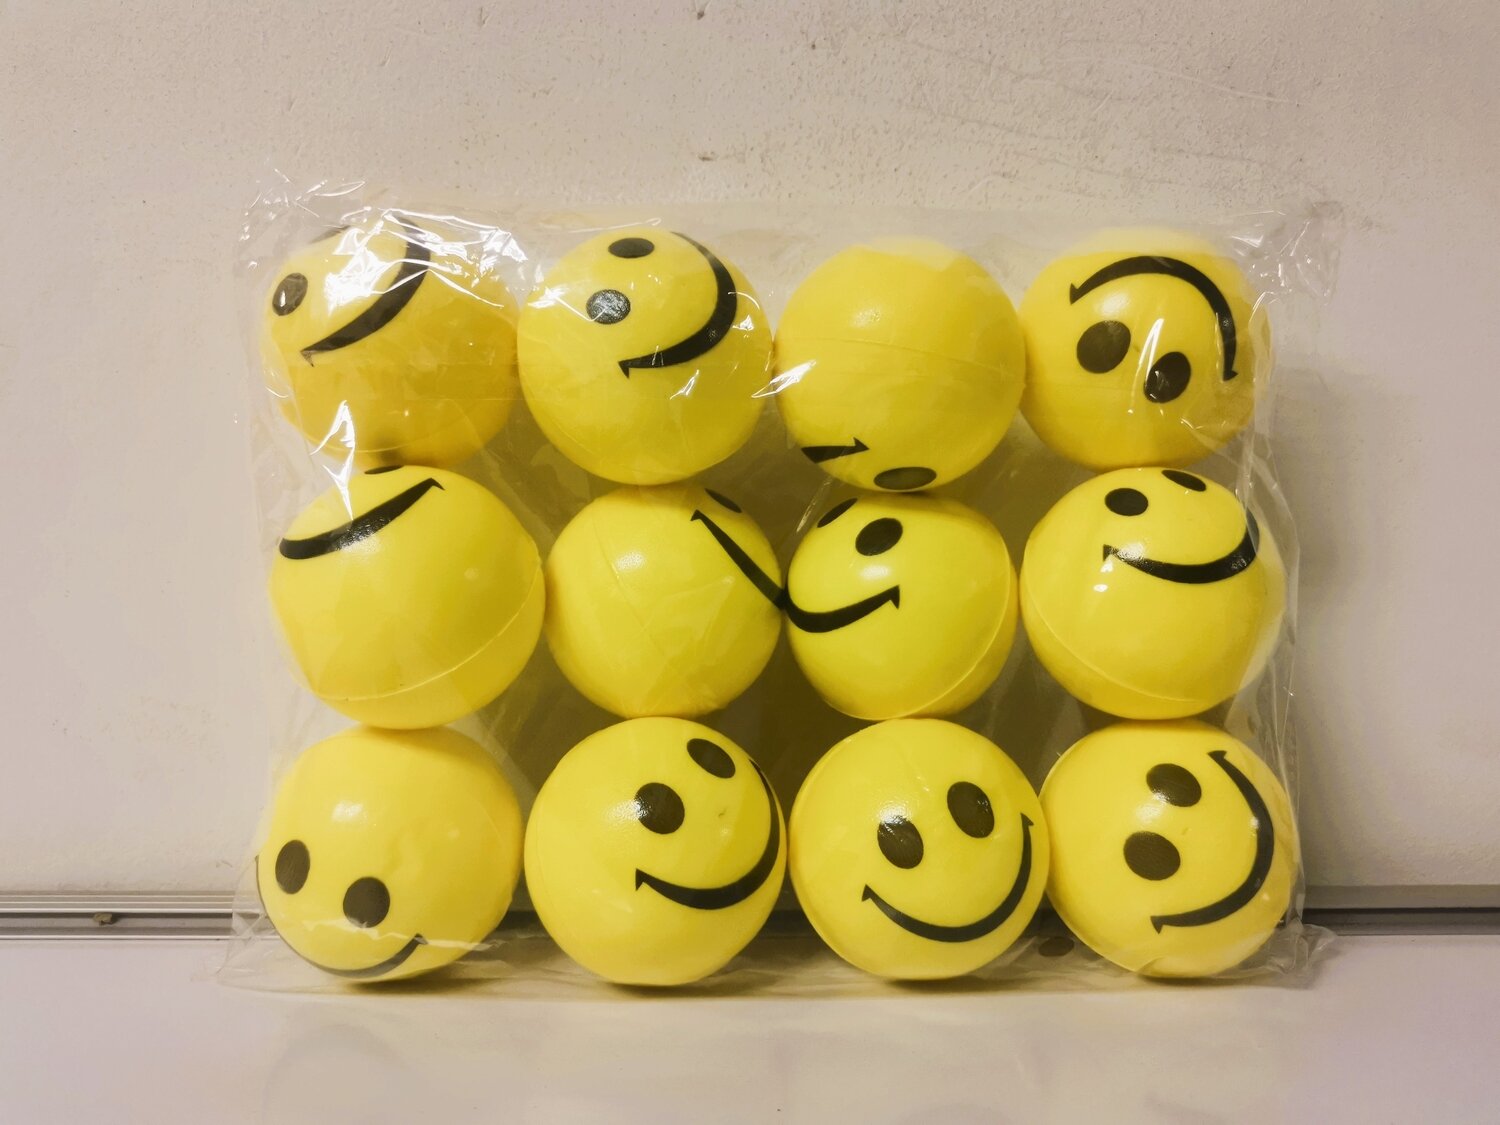 Smiley Relax Ball 12PC